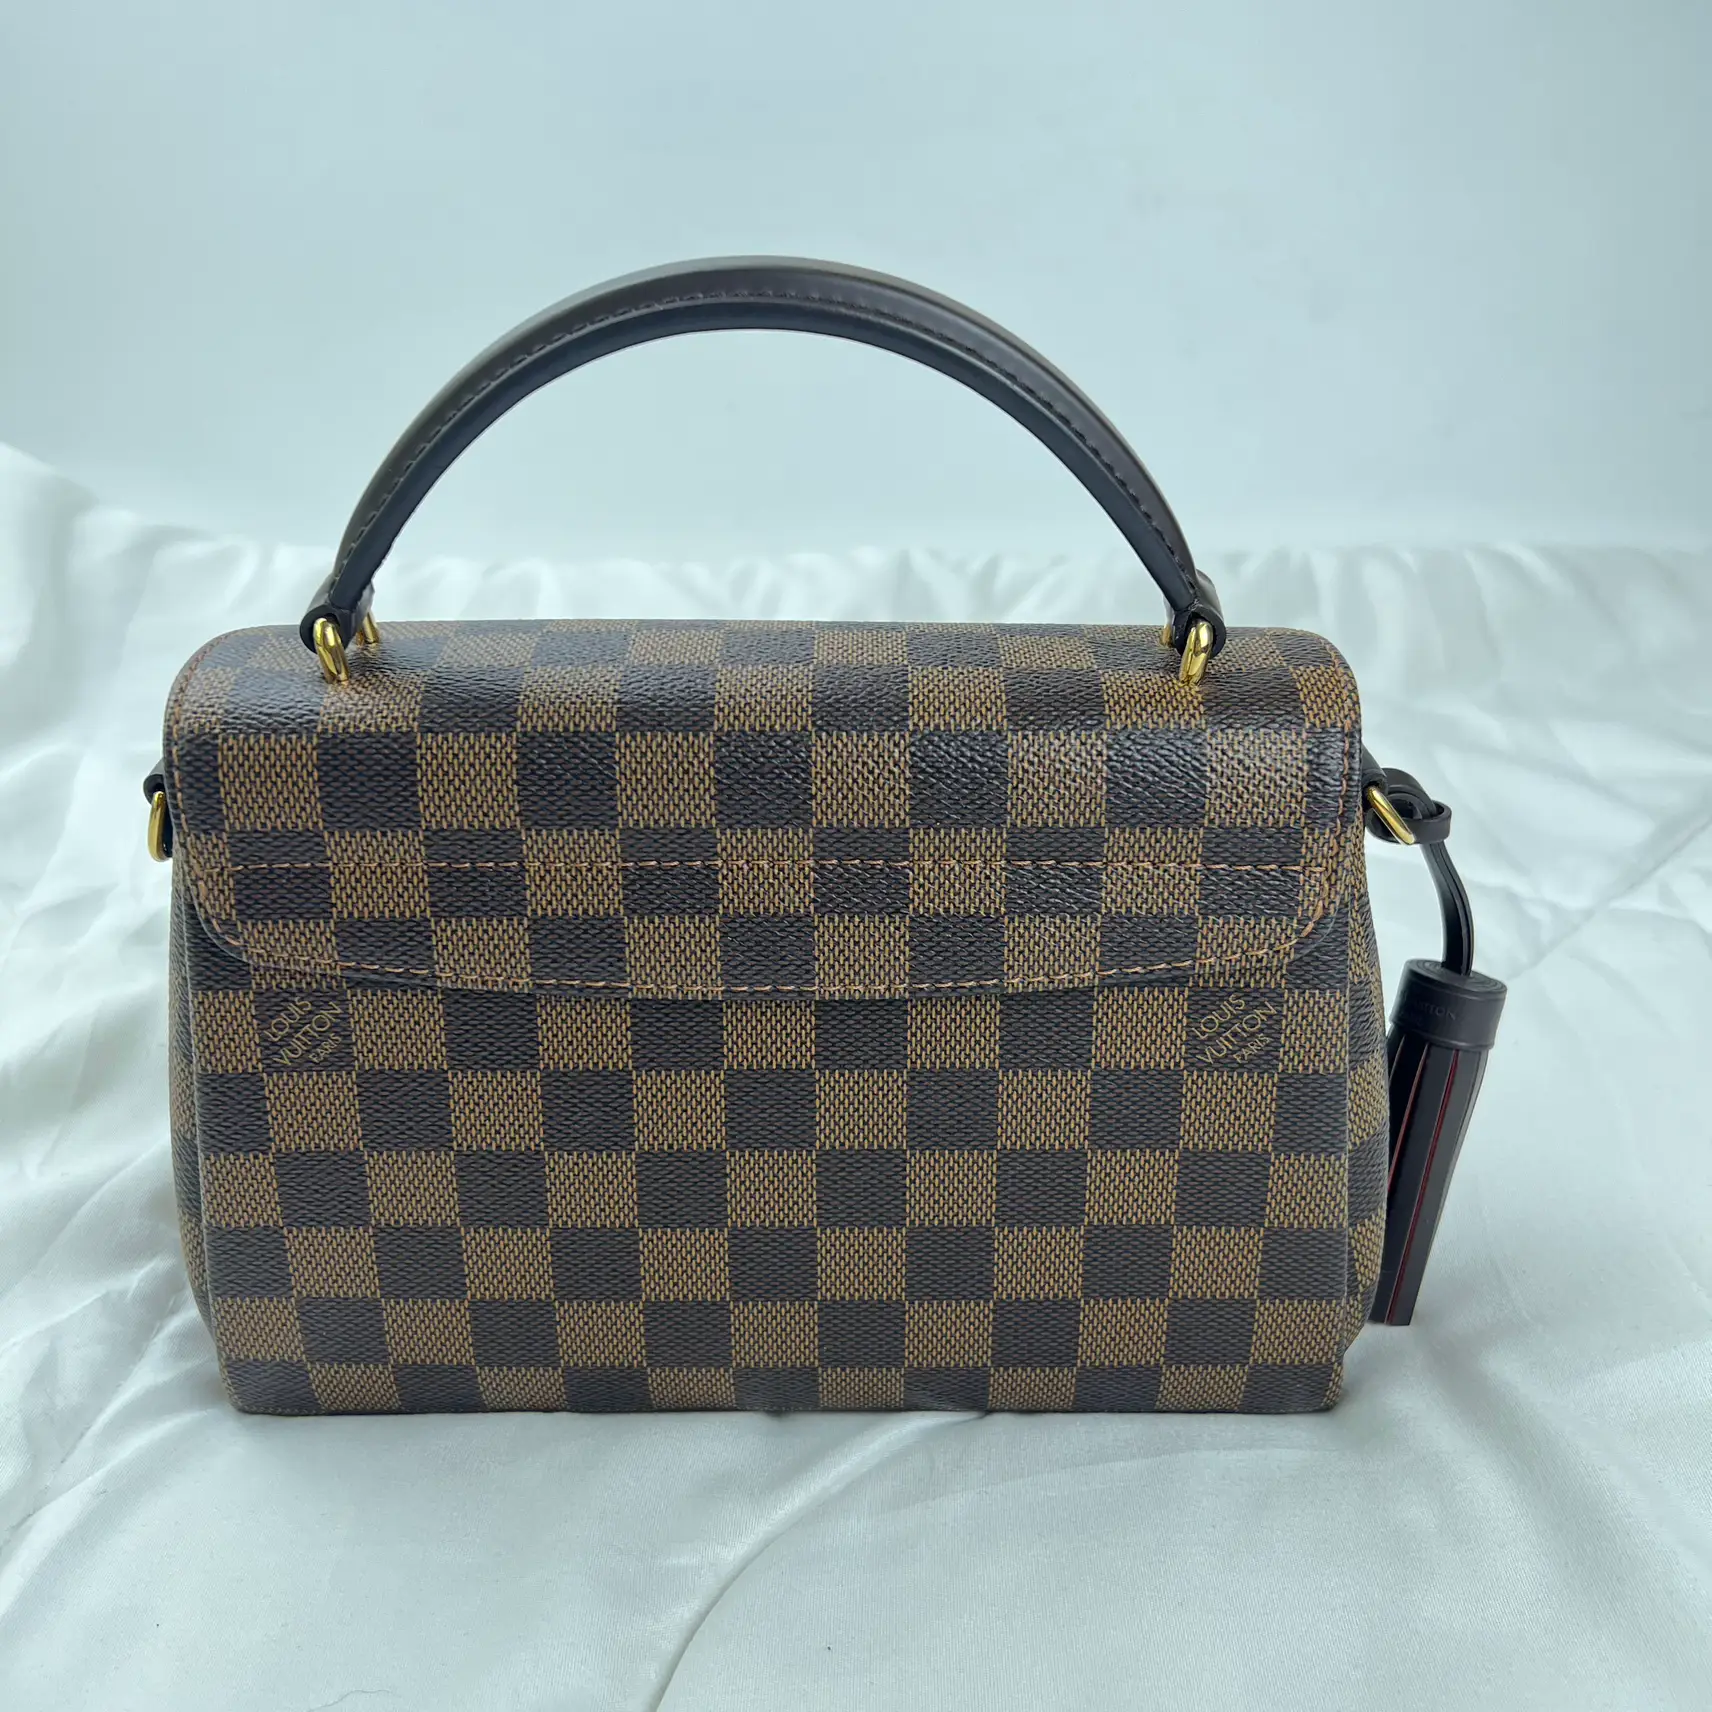 Summer with lv damier azur  Louis vuitton handbags outlet, Casual outfits,  Fashion